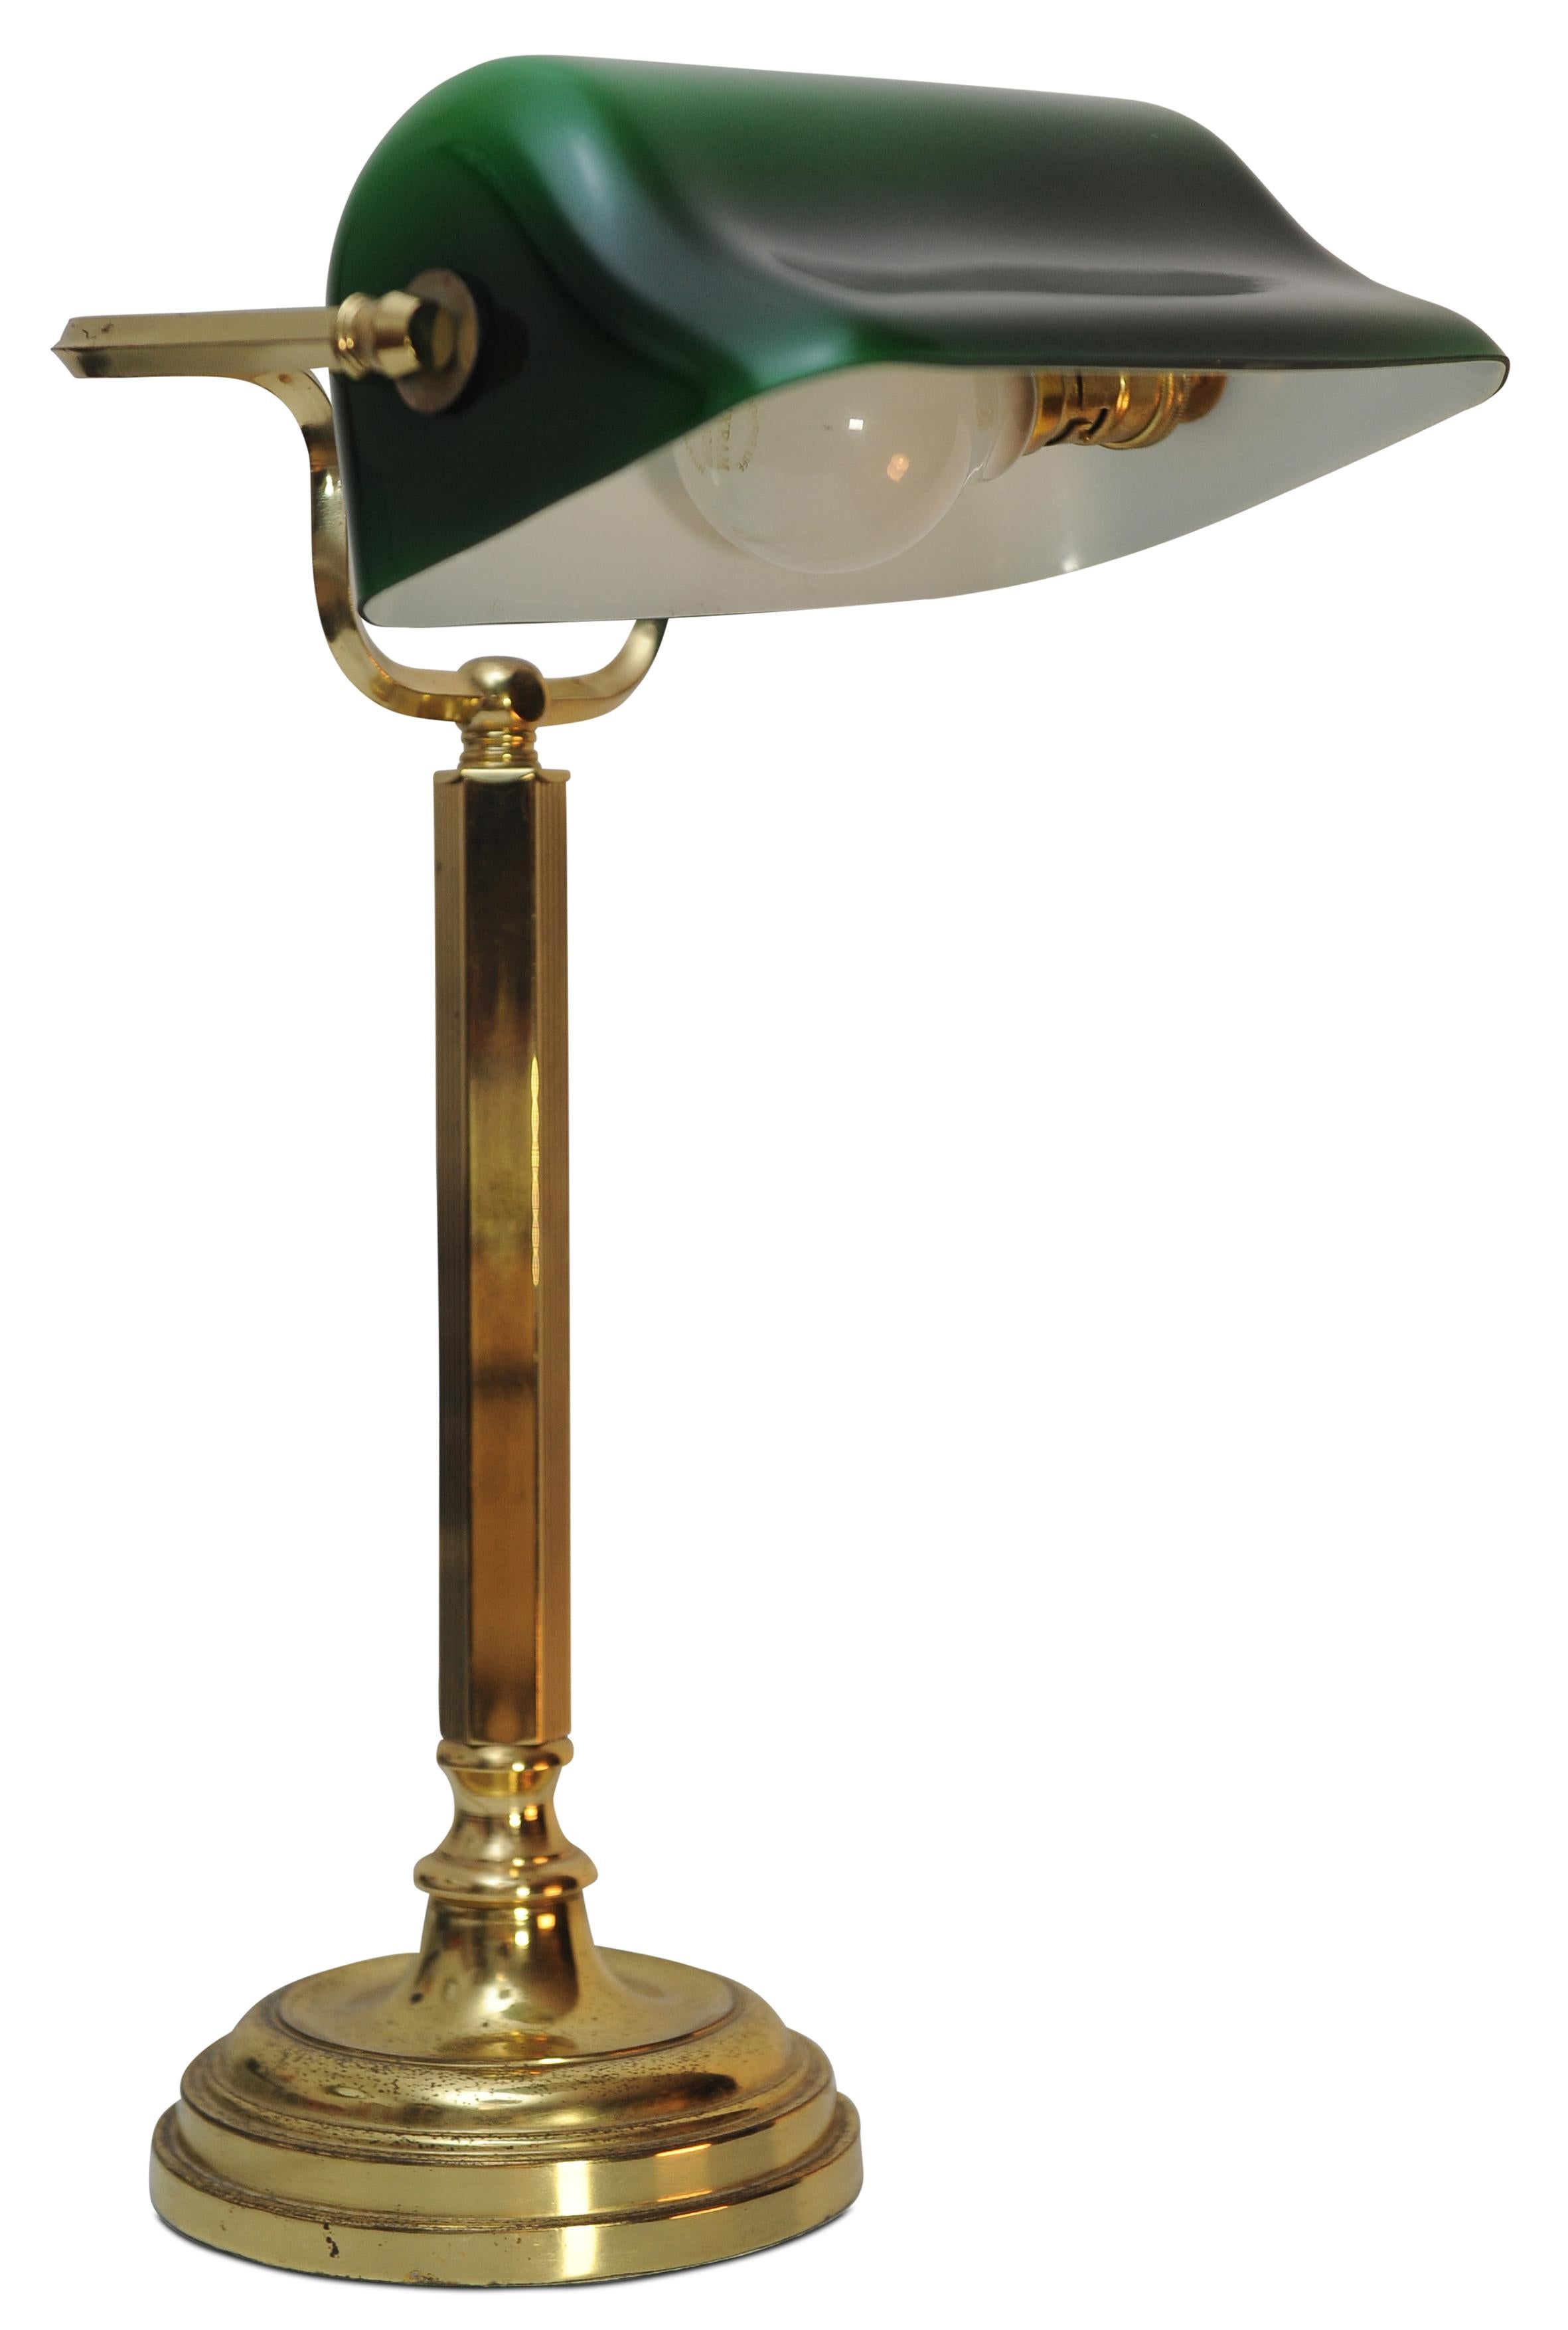 Art Deco Antique Racing Green Brass Bankers Lamp With Adjustable Green Glazed Shade  For Sale